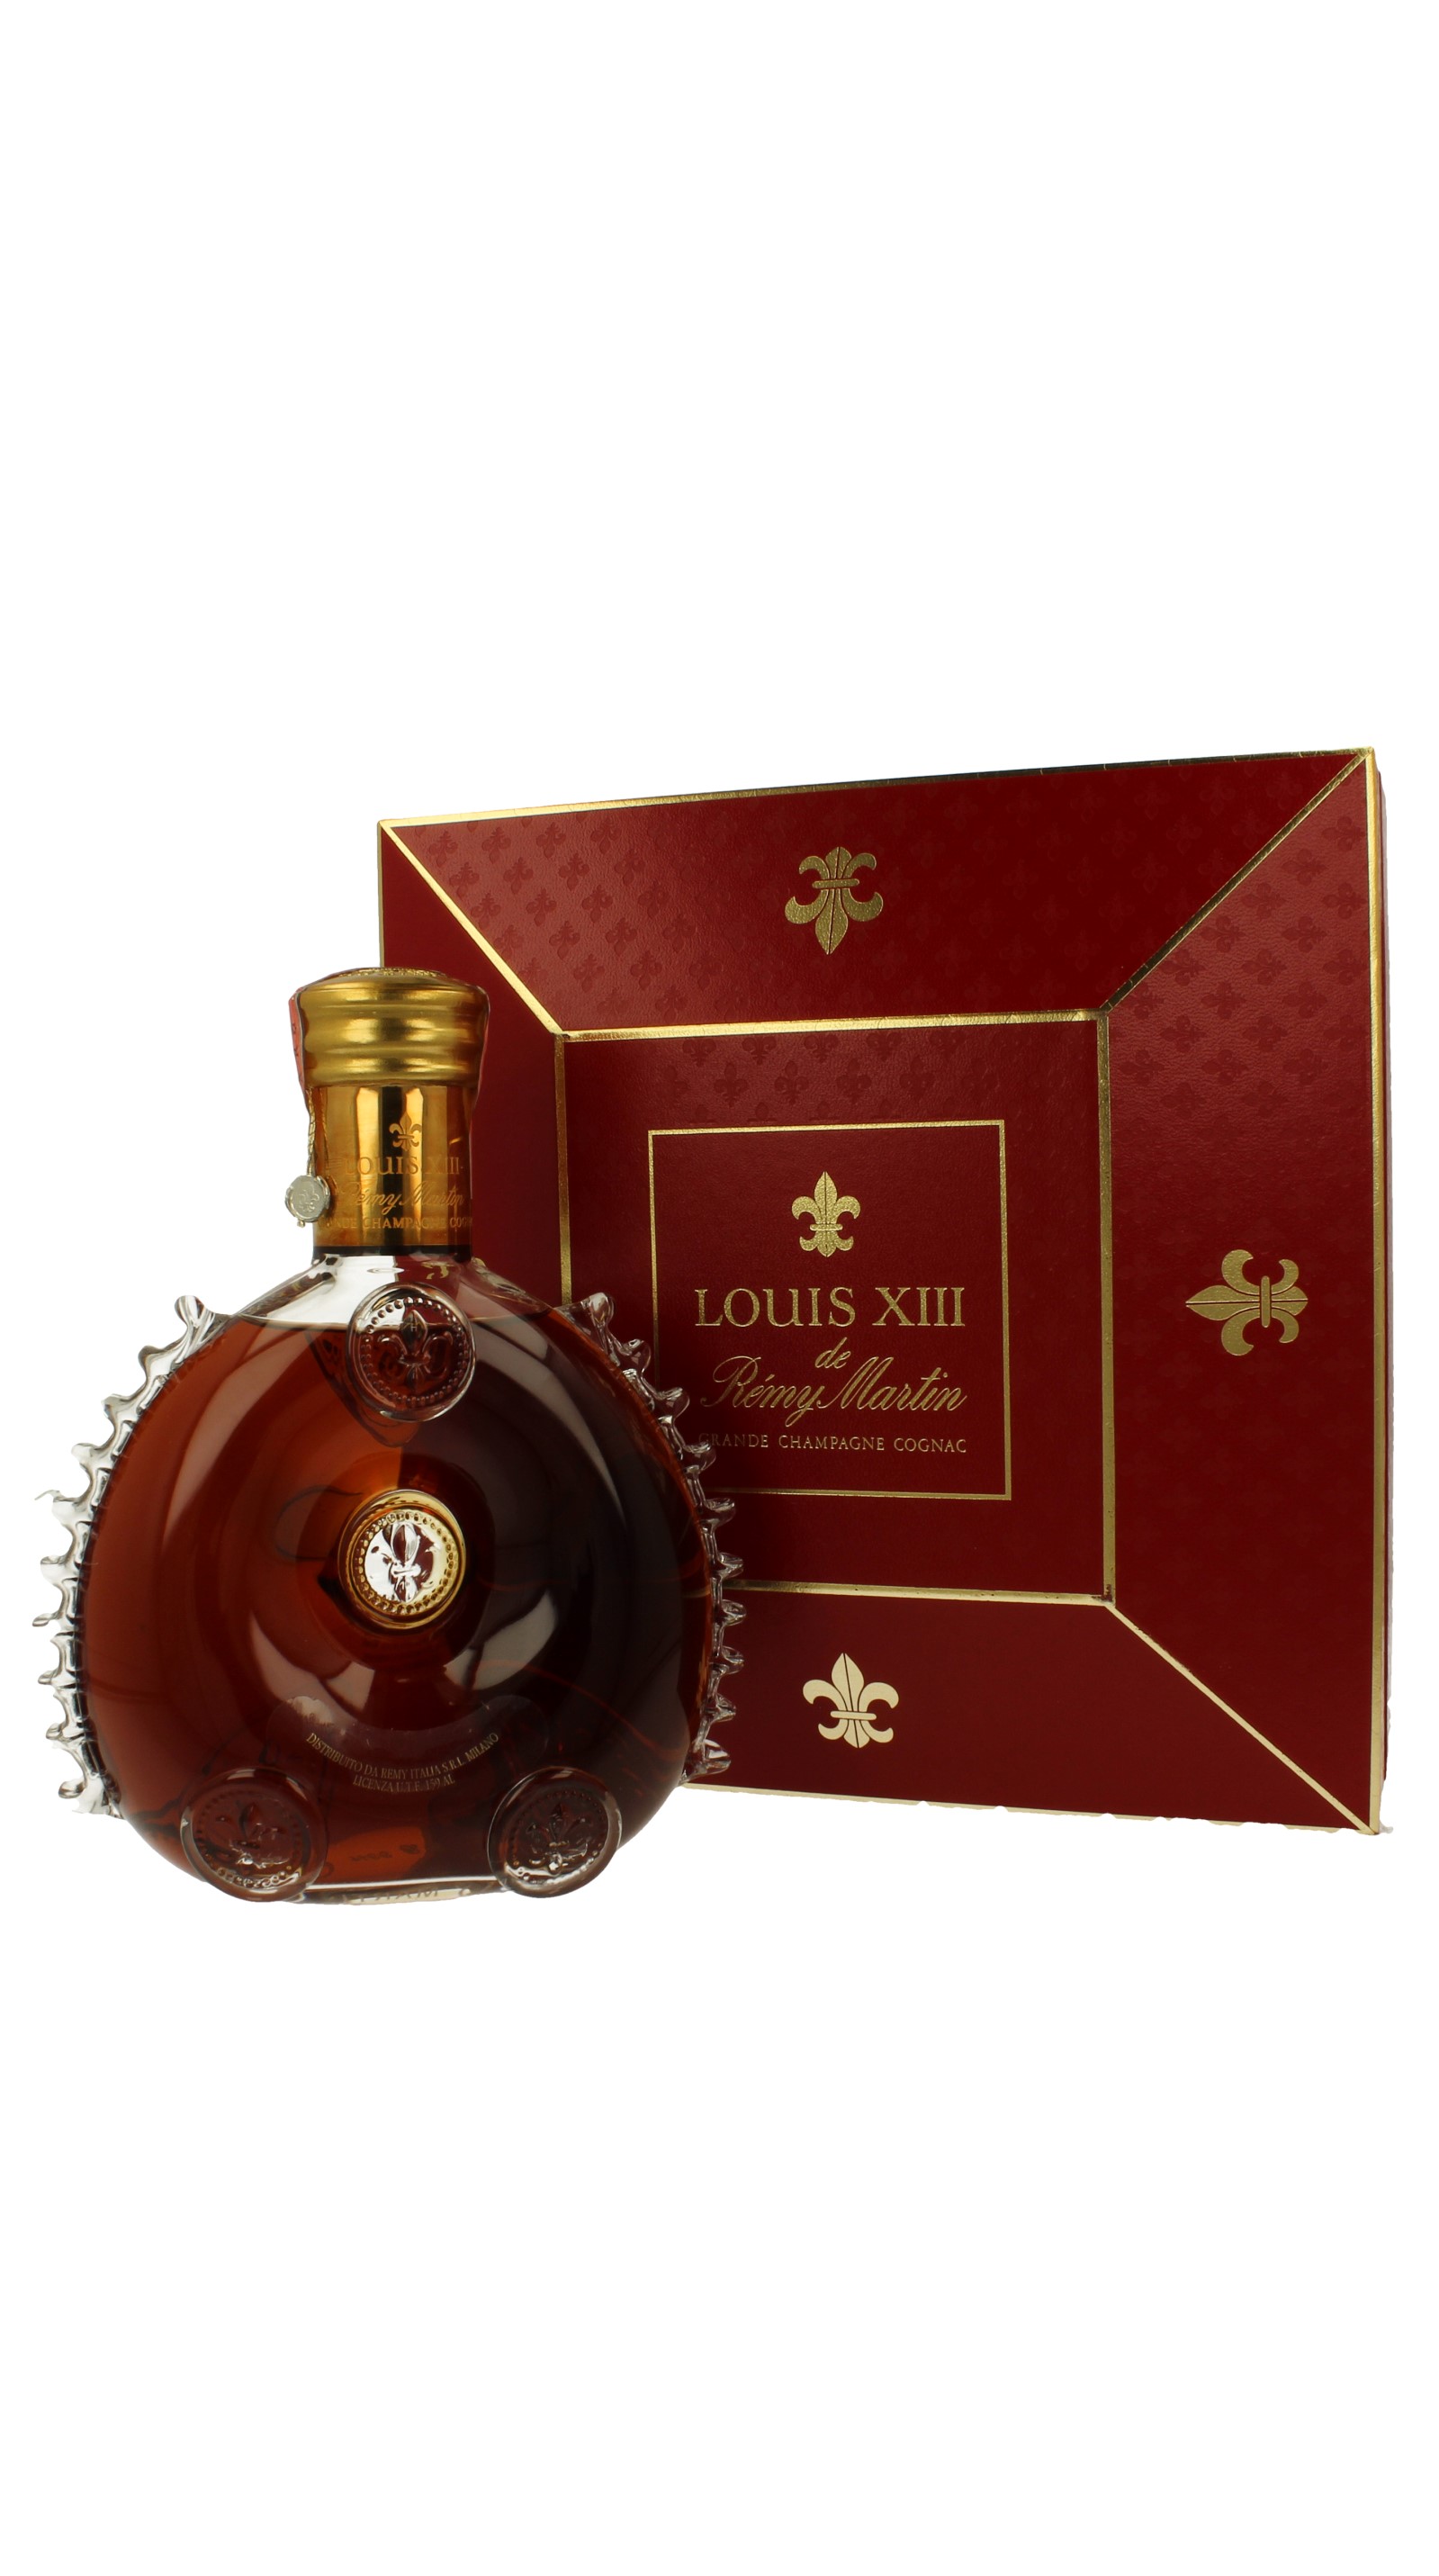 REMY MARTIN Louis XIII Grande Champagne very old Cognac Bot 80's